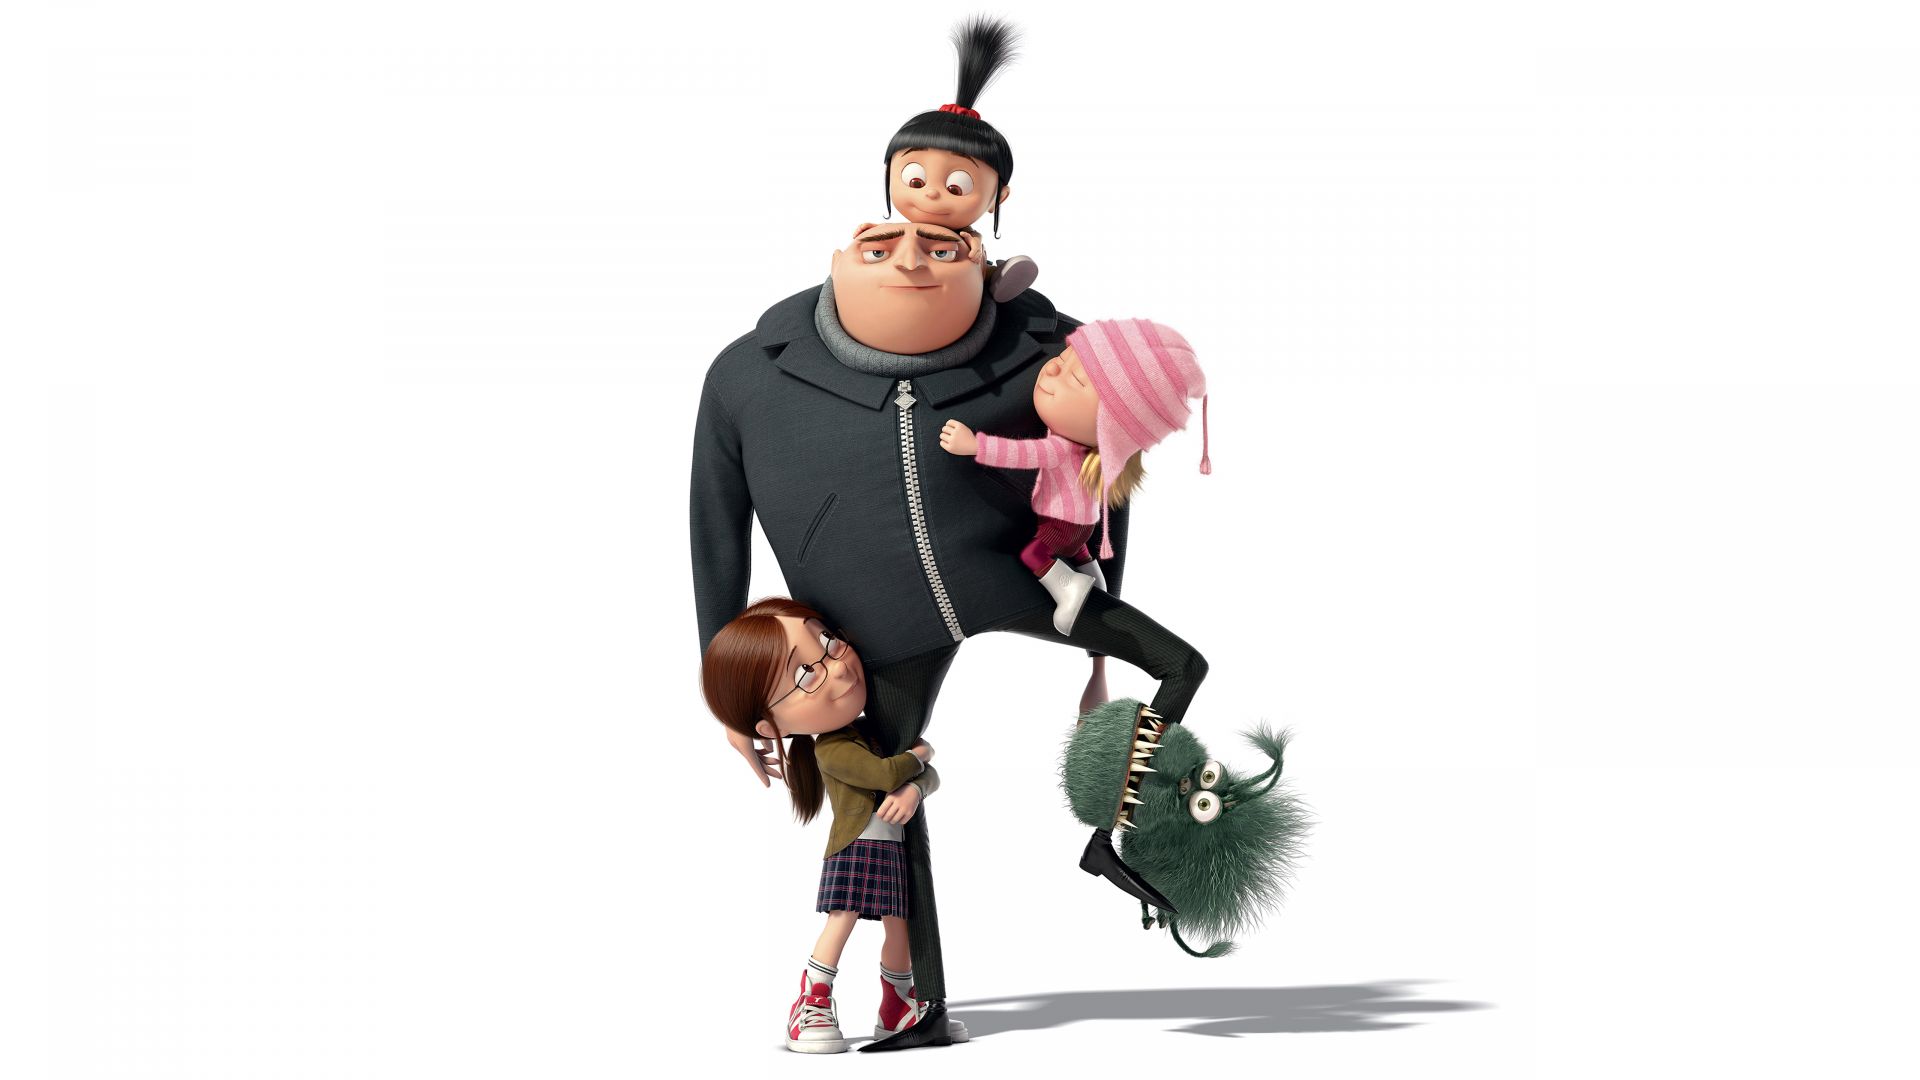 Wallpaper Despicable Me 3, animation movie, Gru, family, 5k